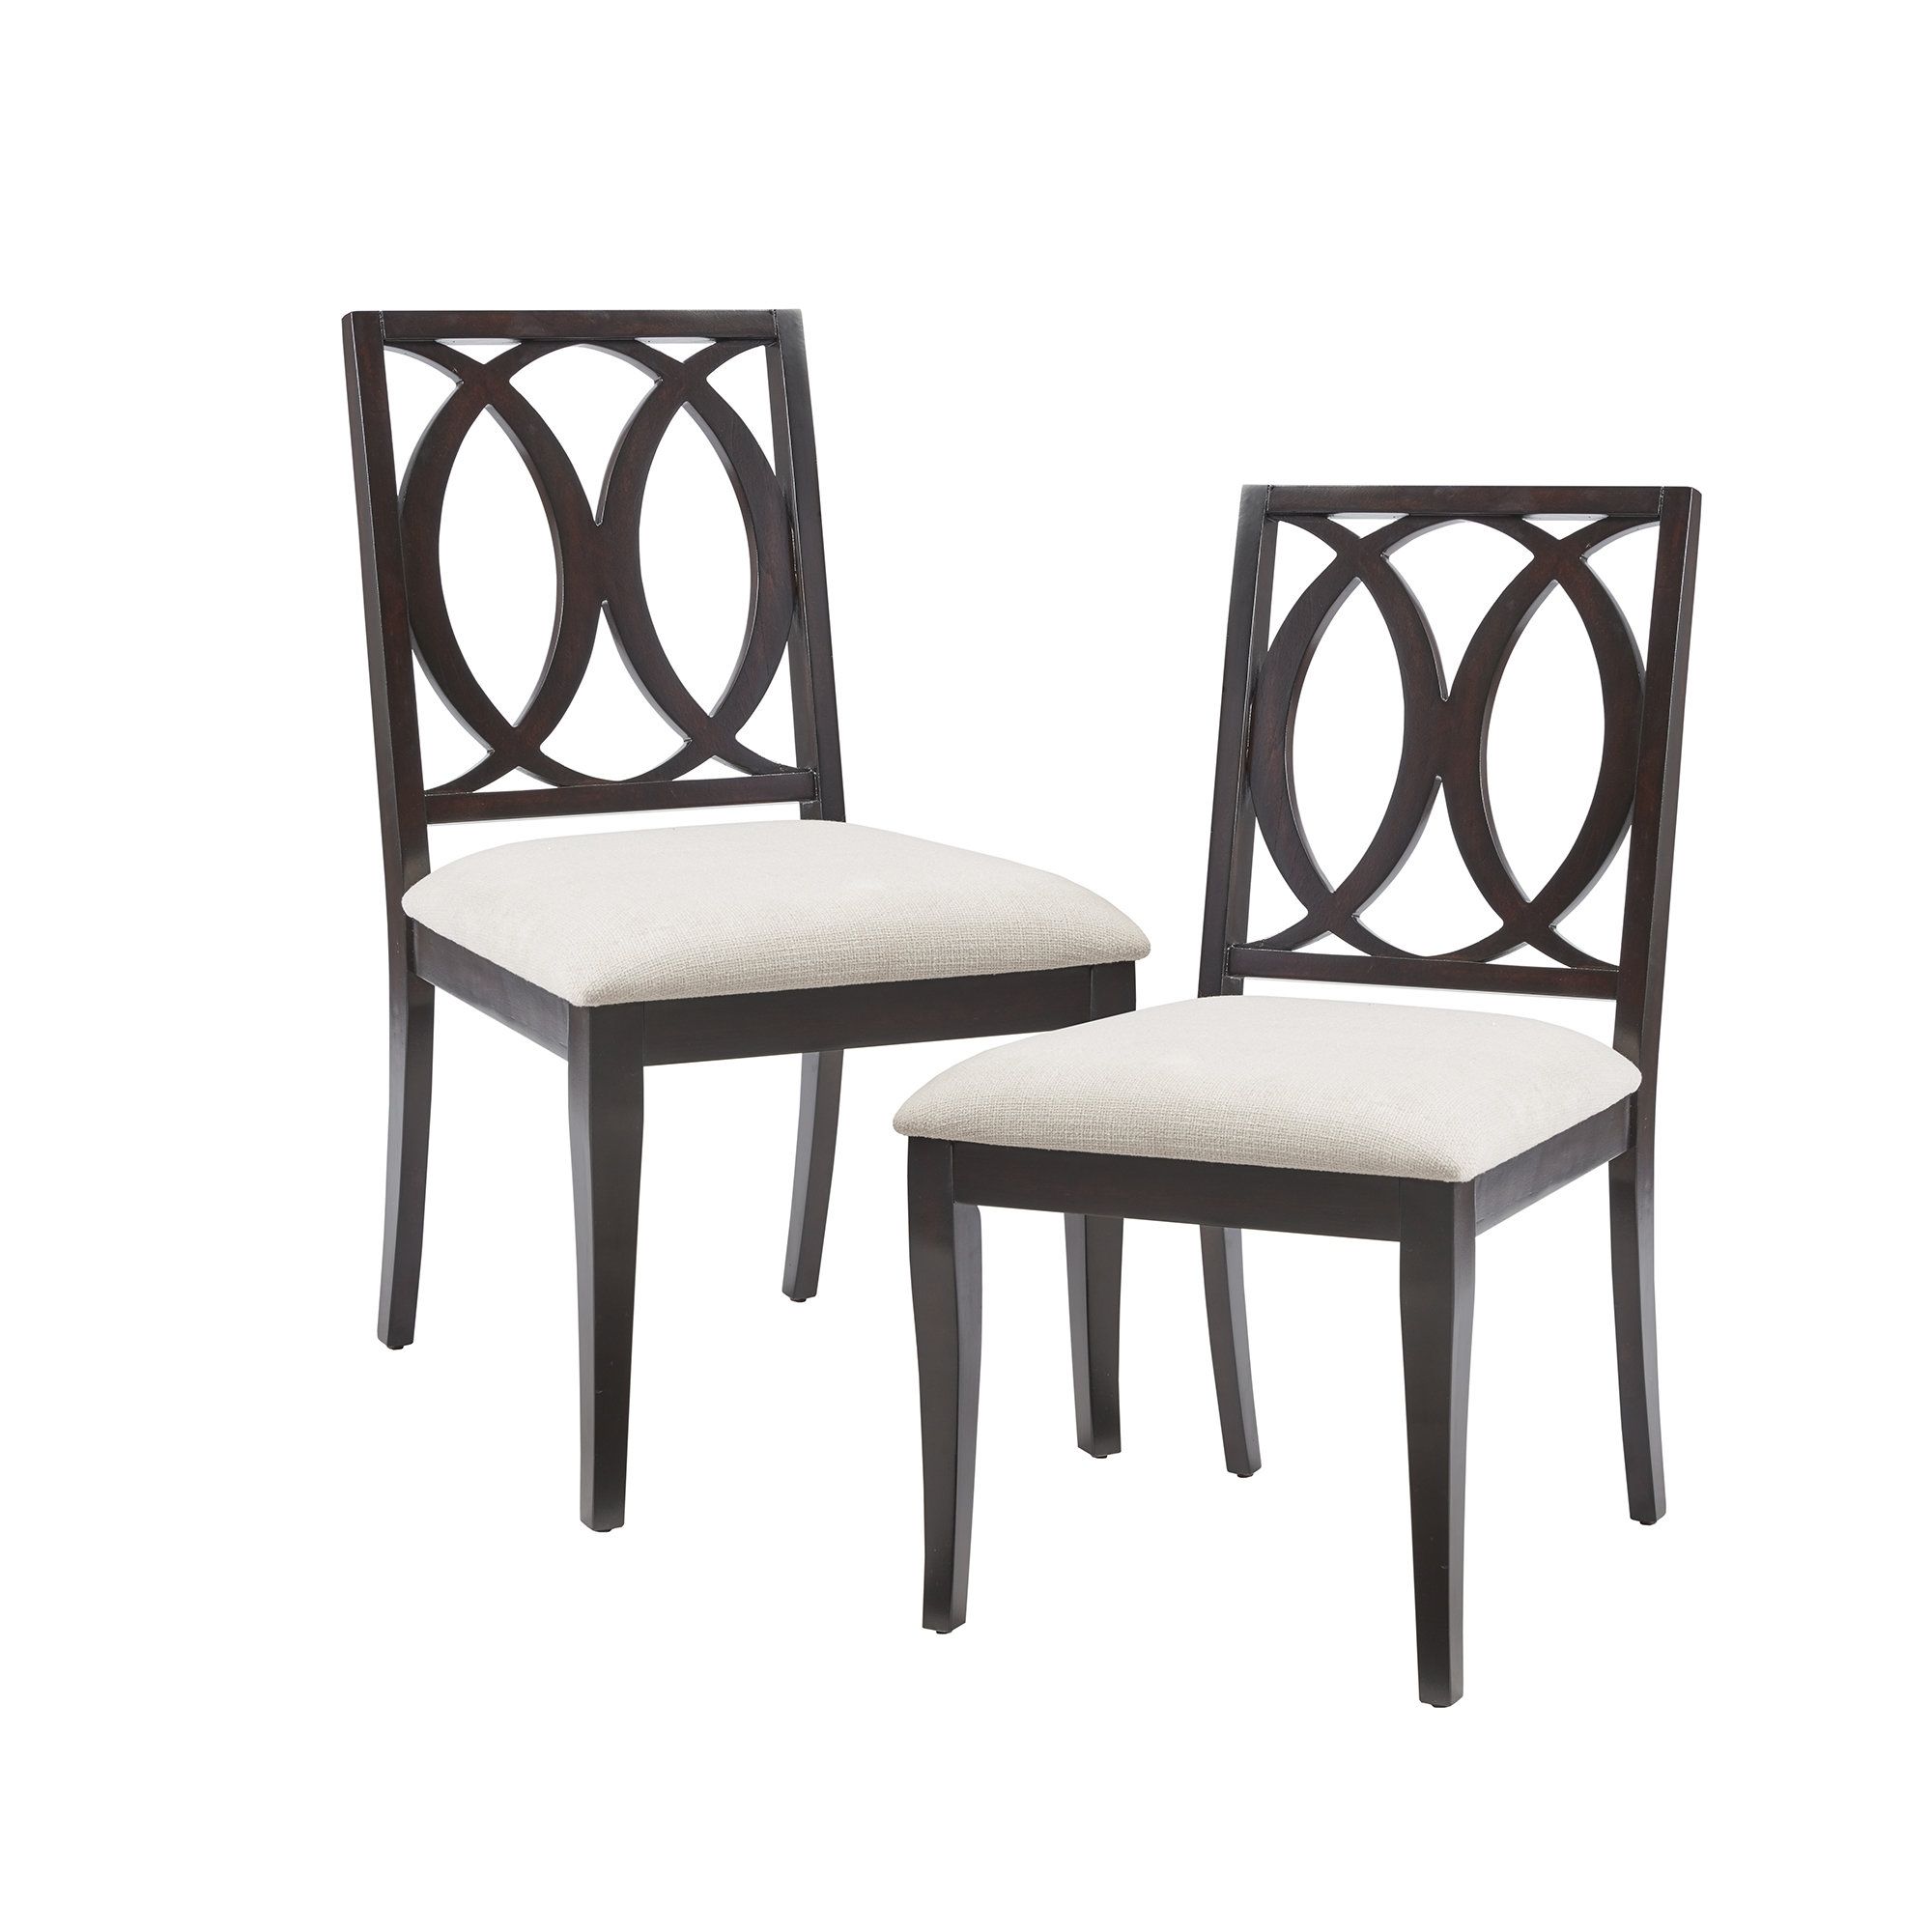 Wayfair Throughout Cooper Upholstered Side Chairs (View 6 of 20)